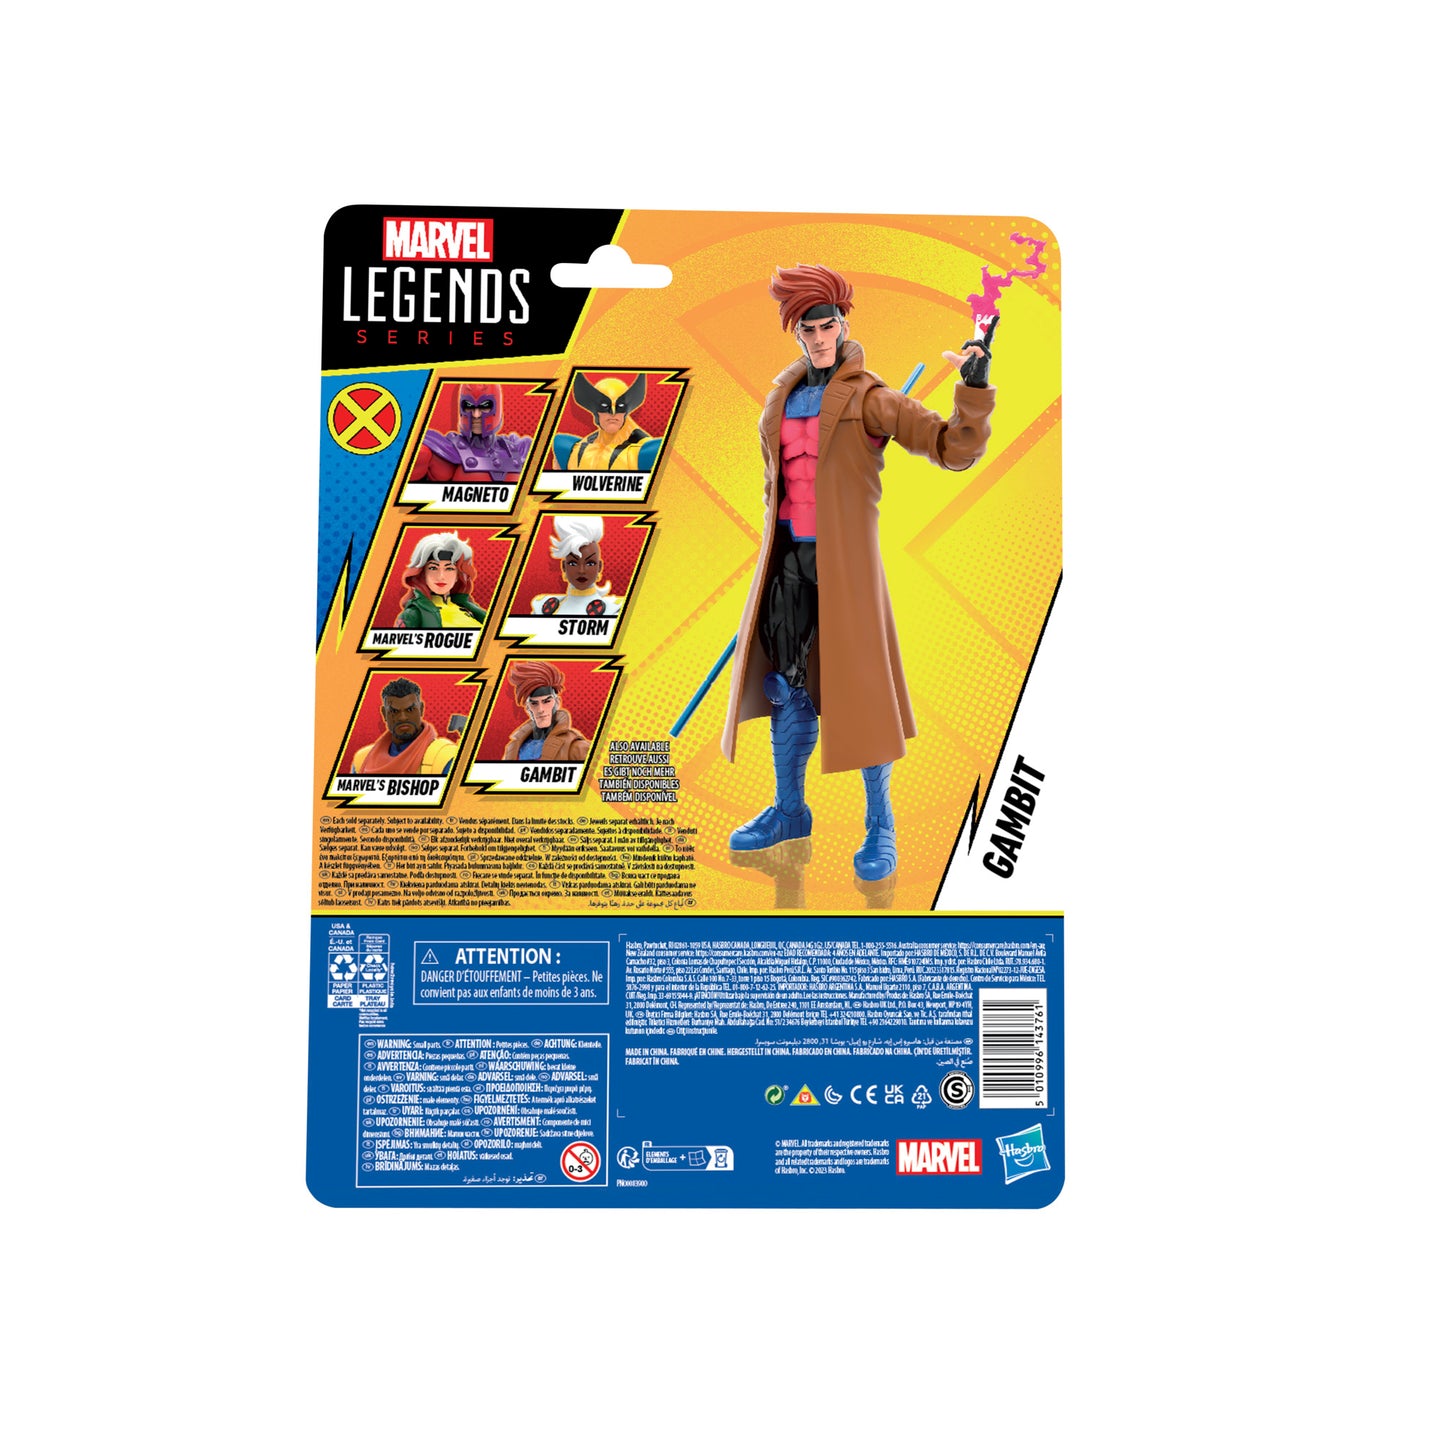 Marvel Legends X-Men Gambit Action Figure in a box back view - Heretoserveyou